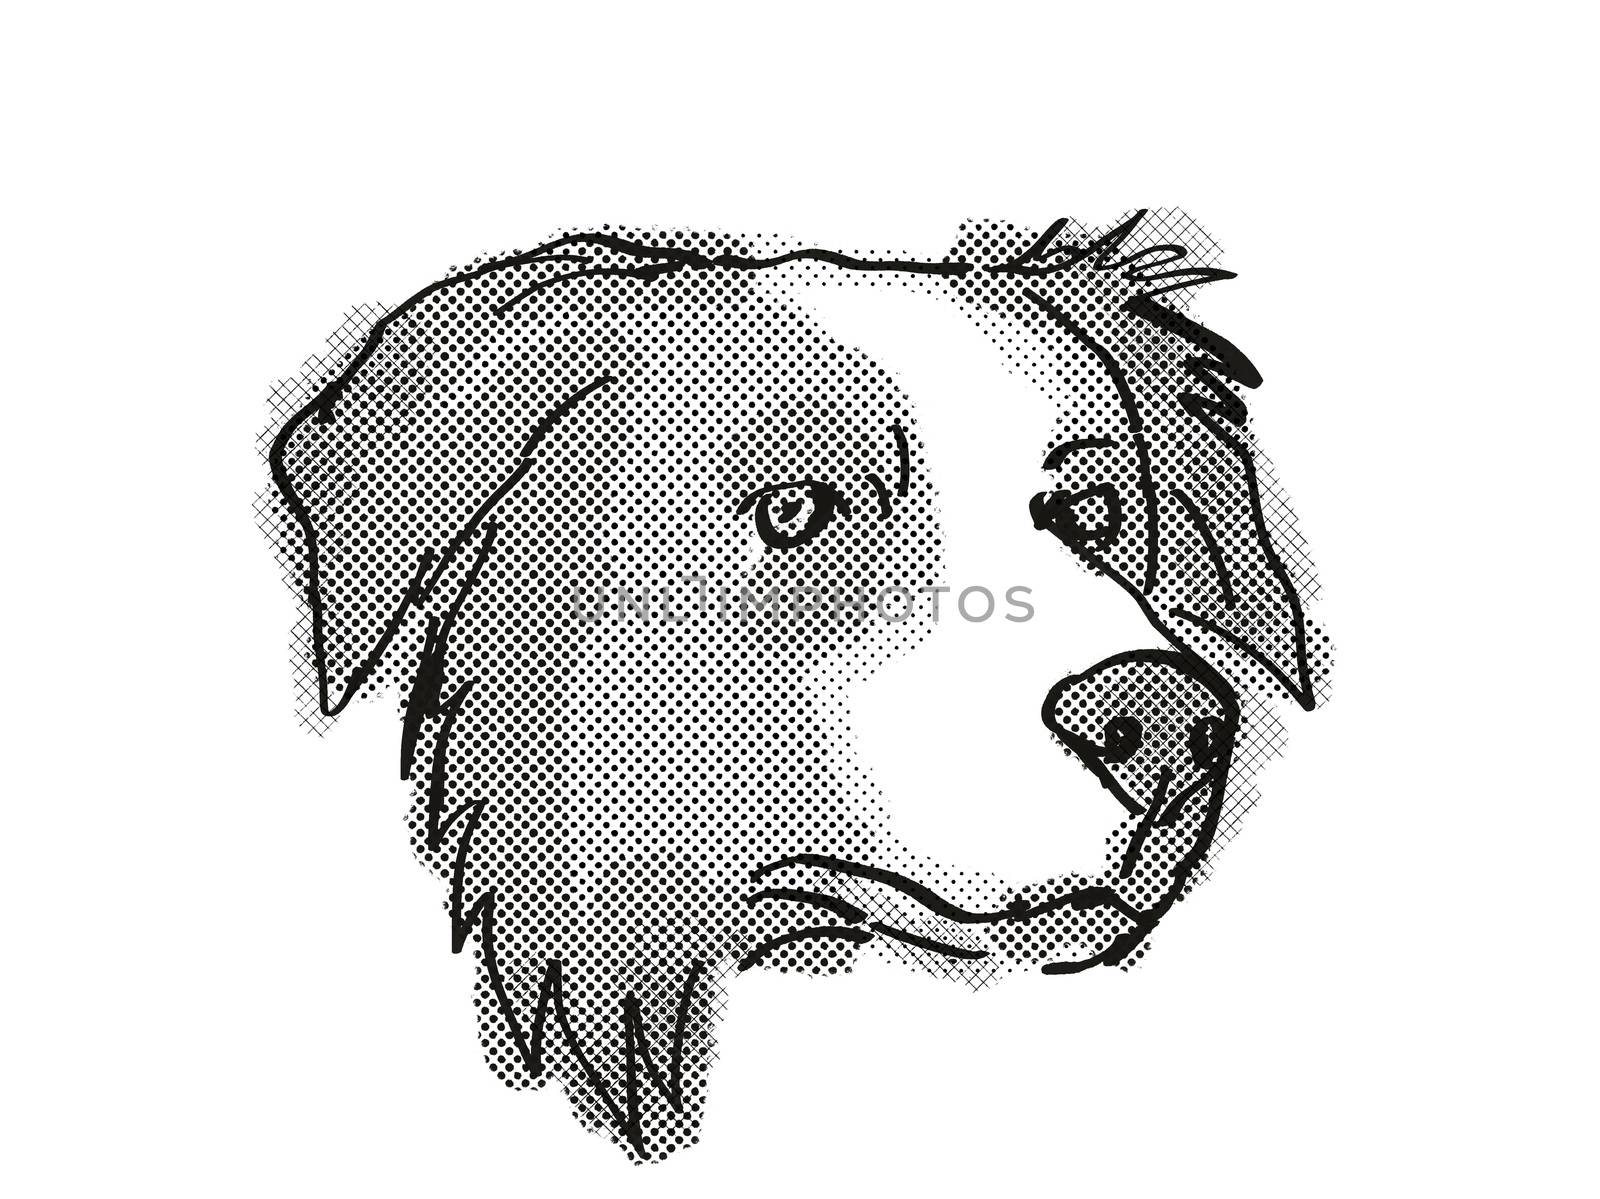 Retro cartoon style drawing of head of a Border Collie , a domestic dog or canine breed on isolated white background done in black and white.